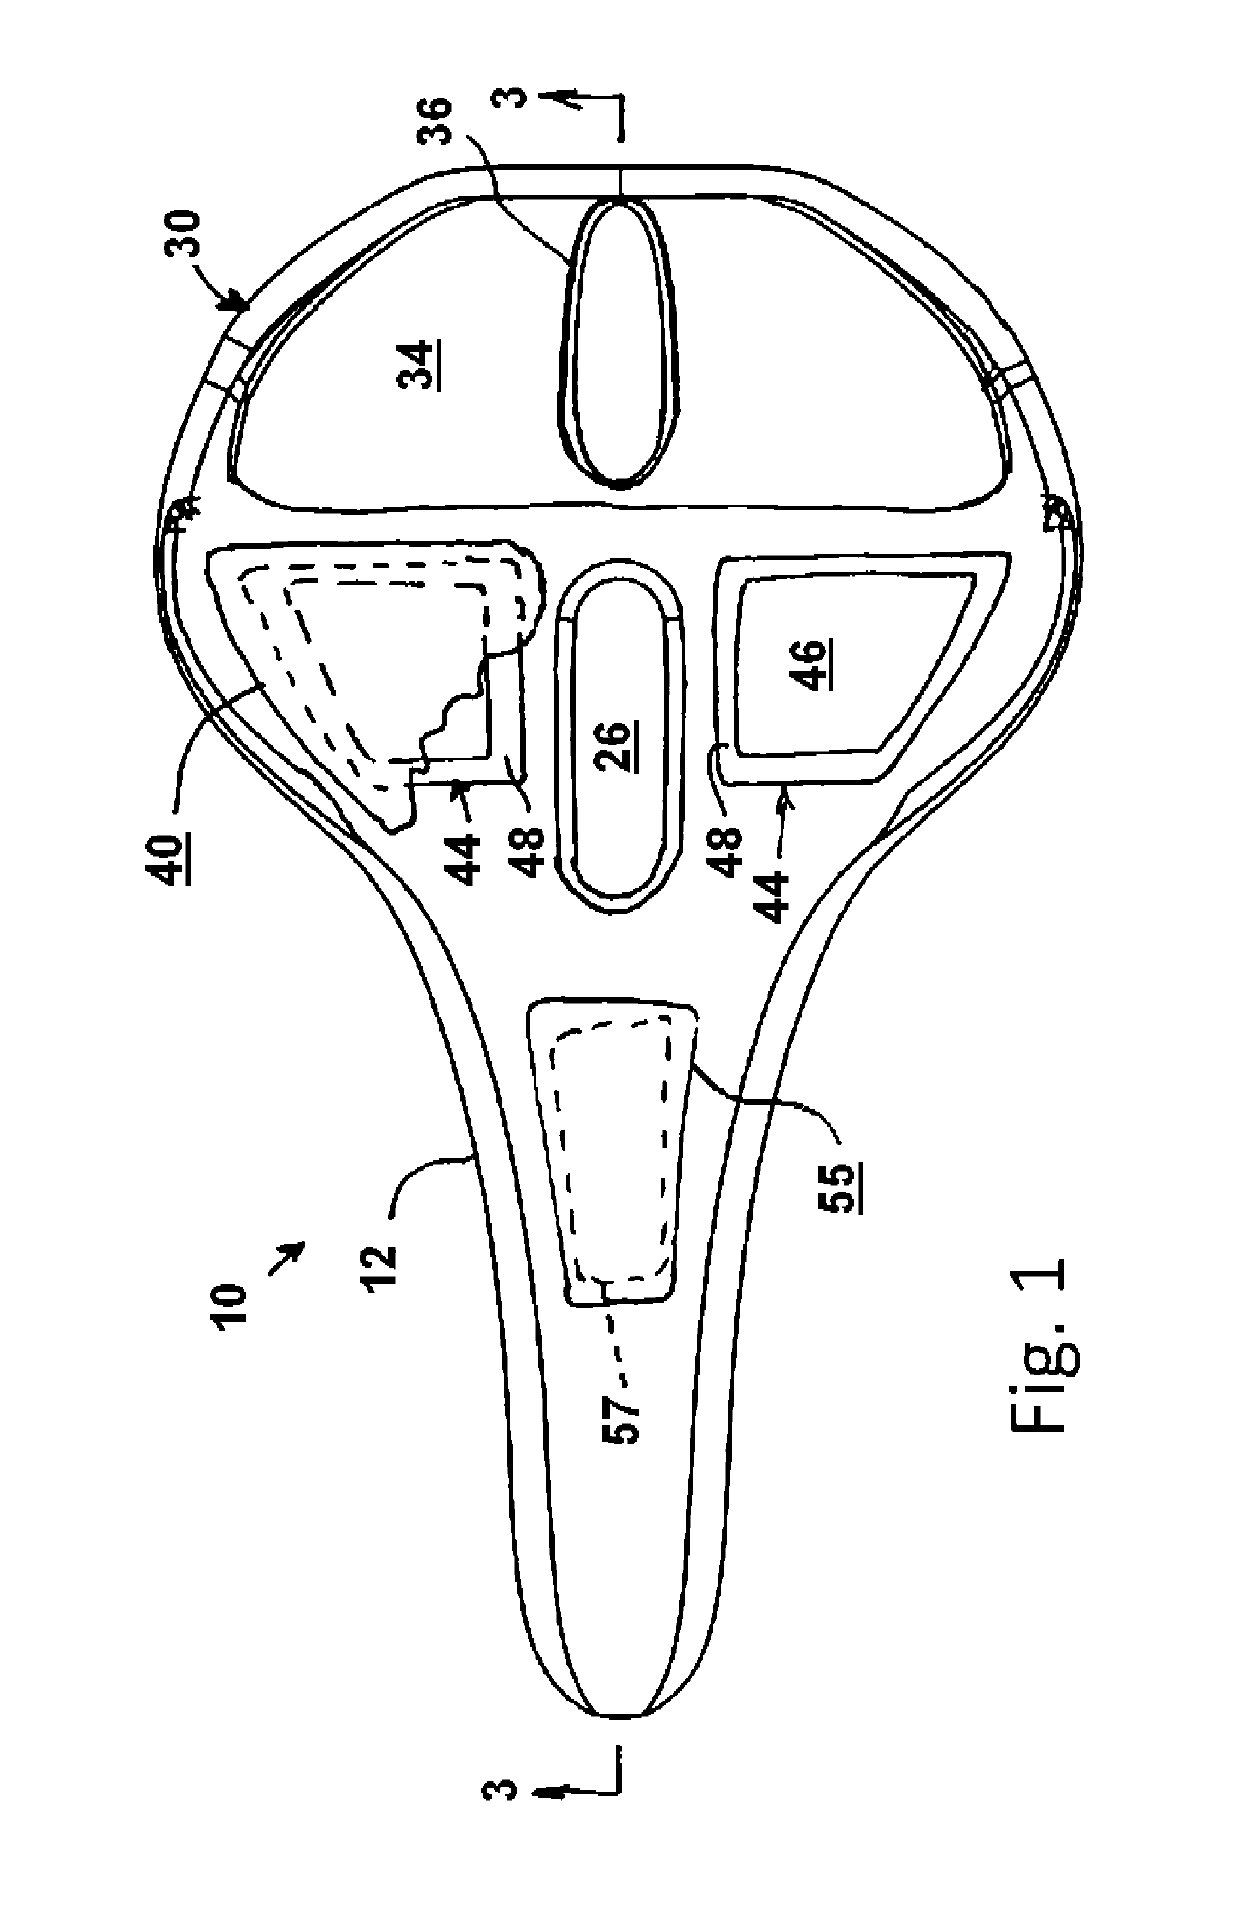 Bicycle seat for protecting ischial tuberosities